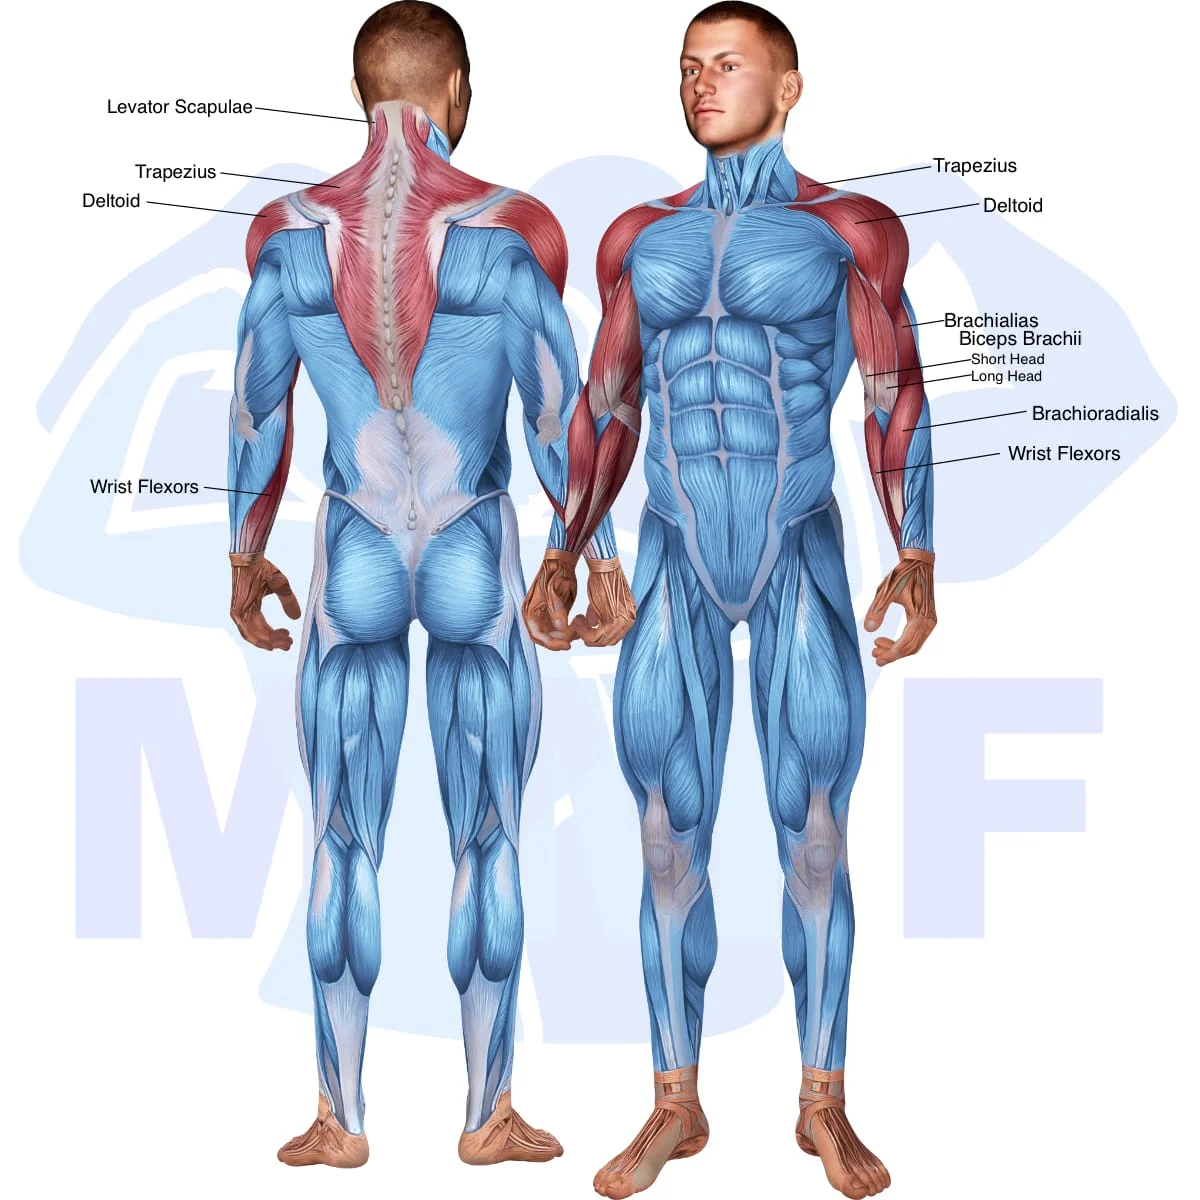 Image of the skeletal muscular system with the muscles used in the cable v bar curls exercise highlighted in red and the rest in blue.